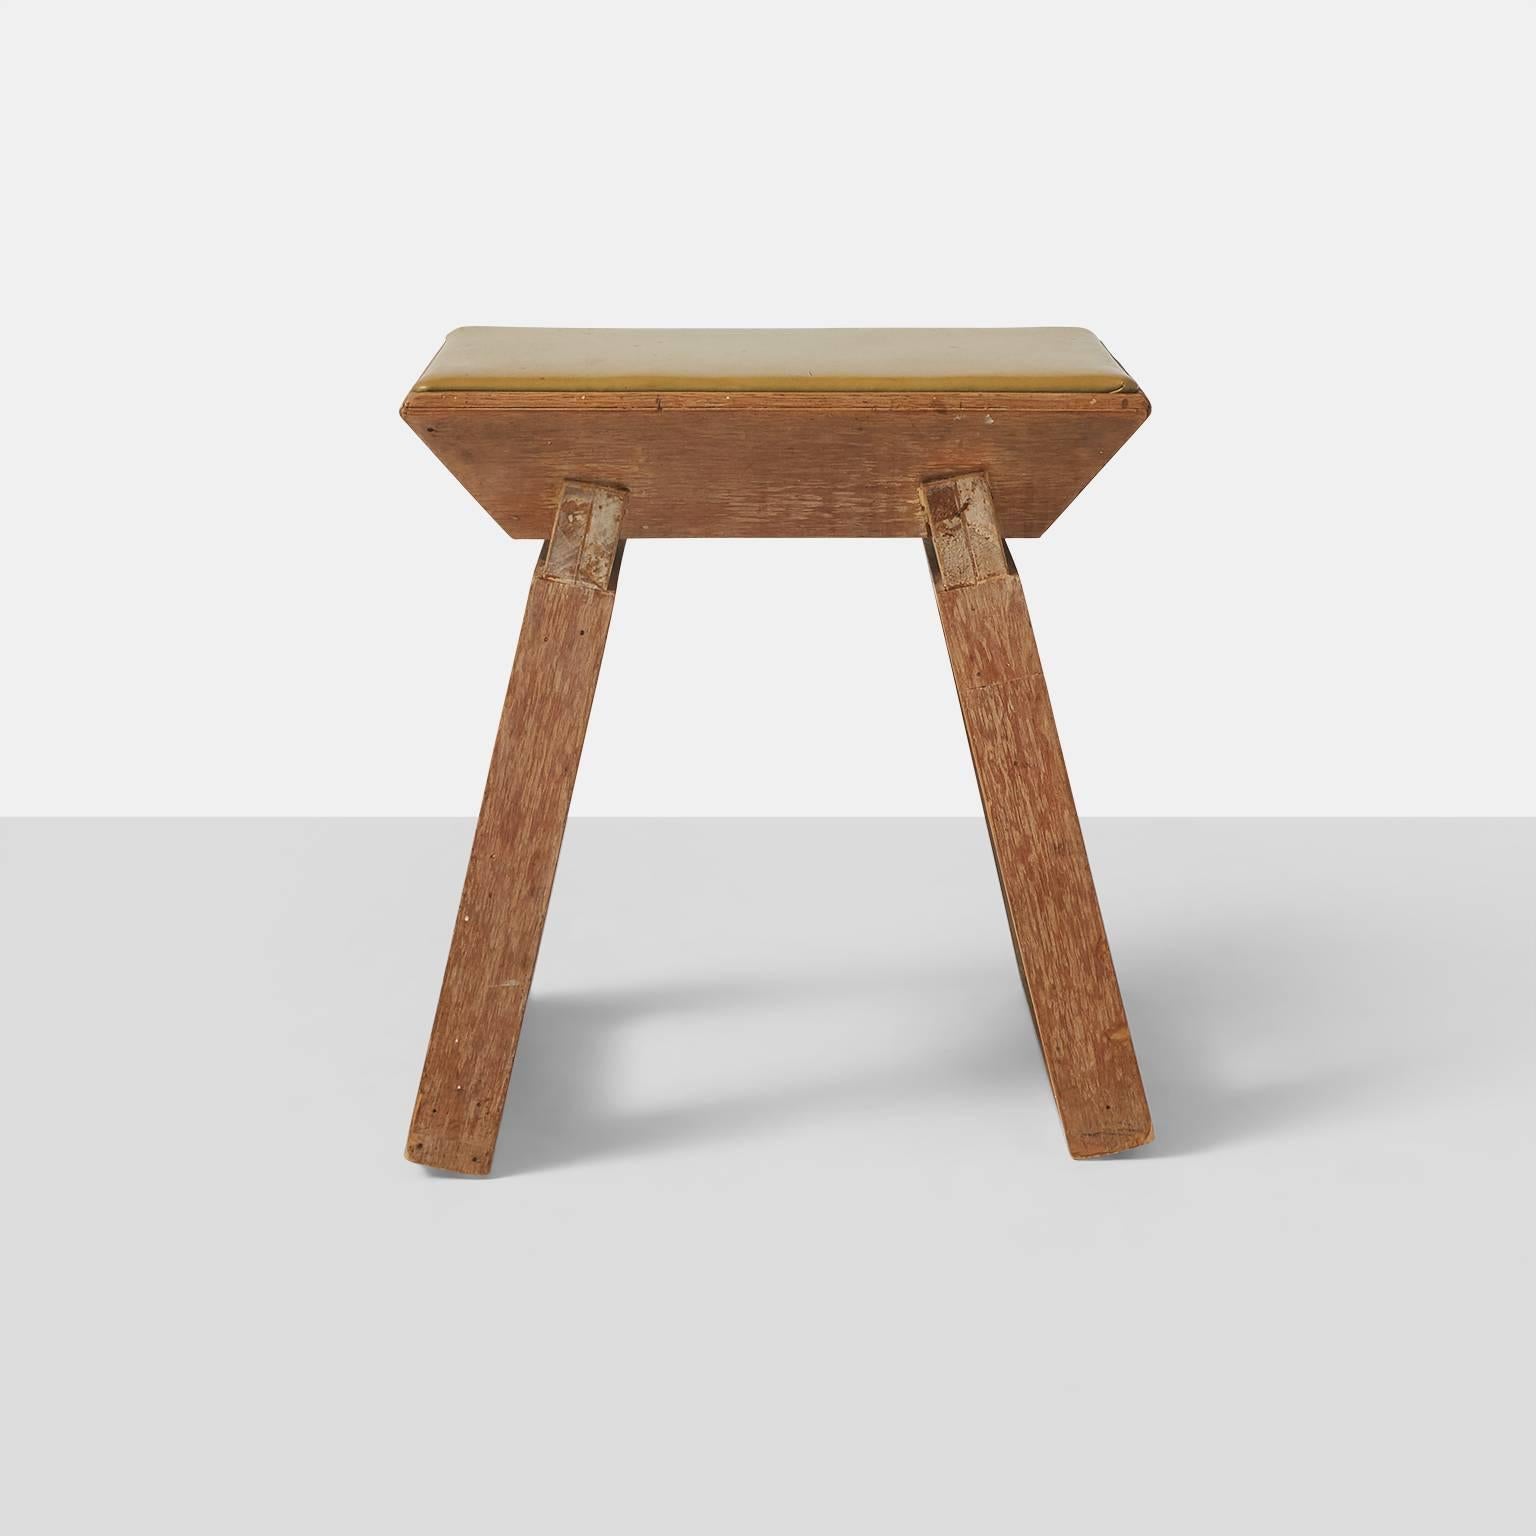 American Architectural Stool